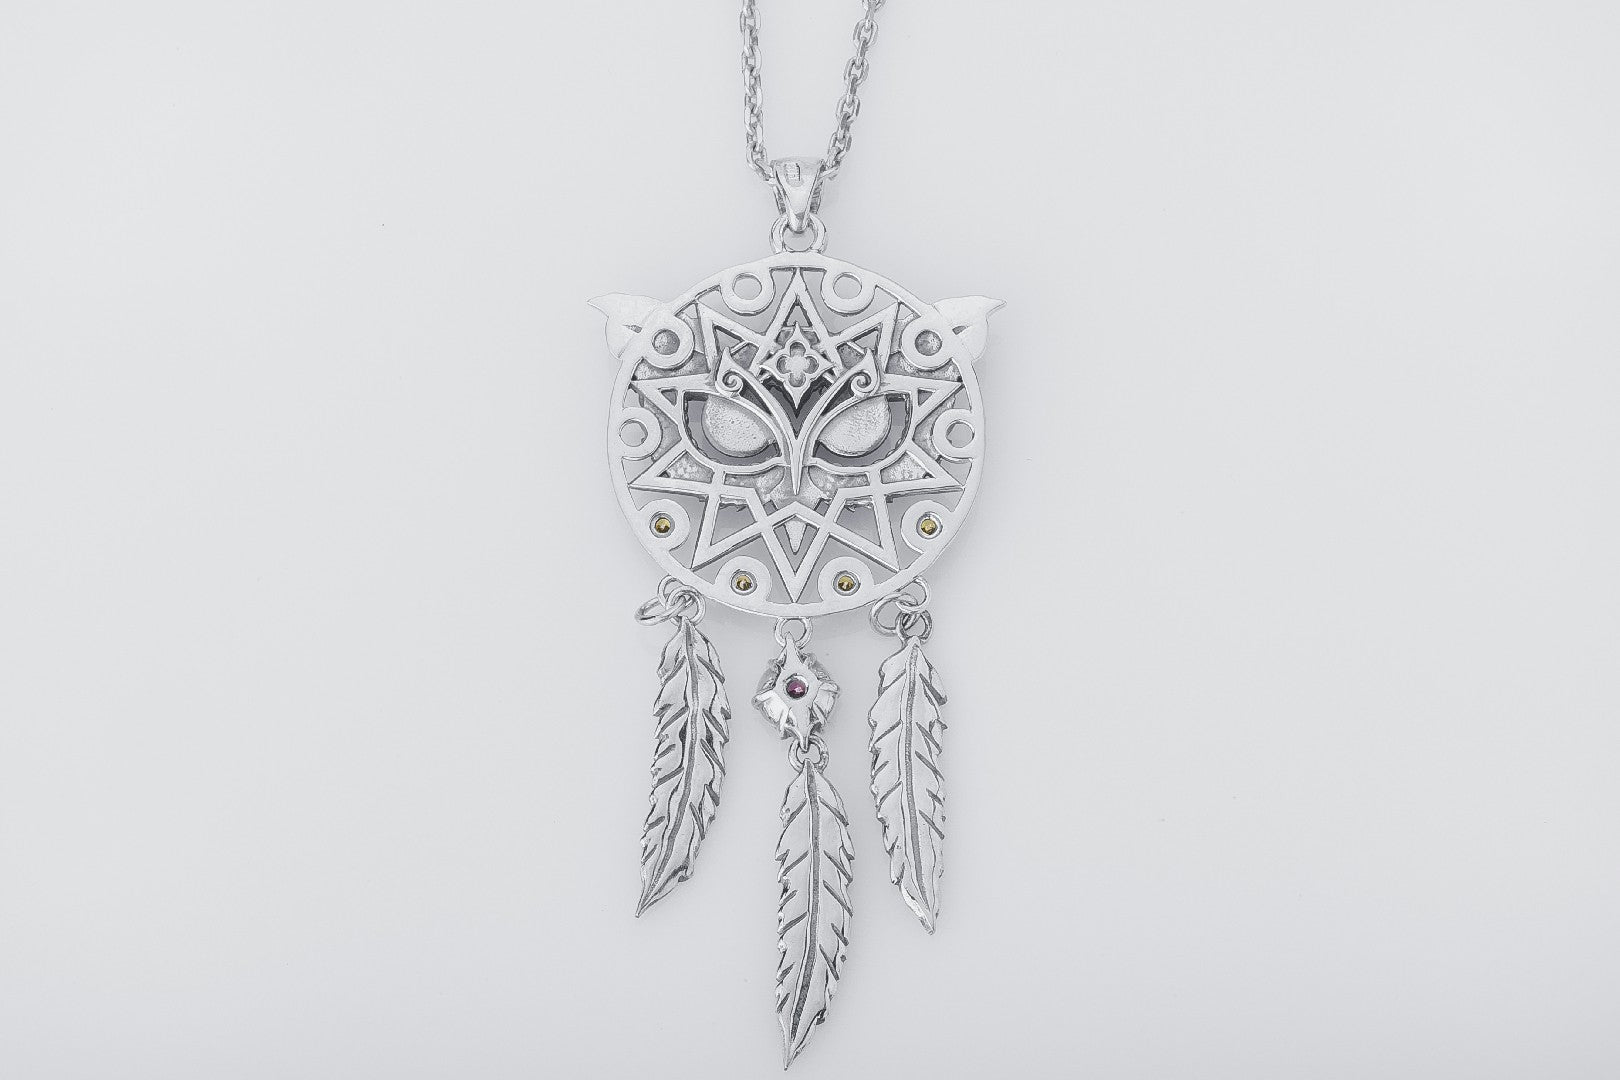 Dreamcatcher Pendant with Owl and Gems, 925 Silver